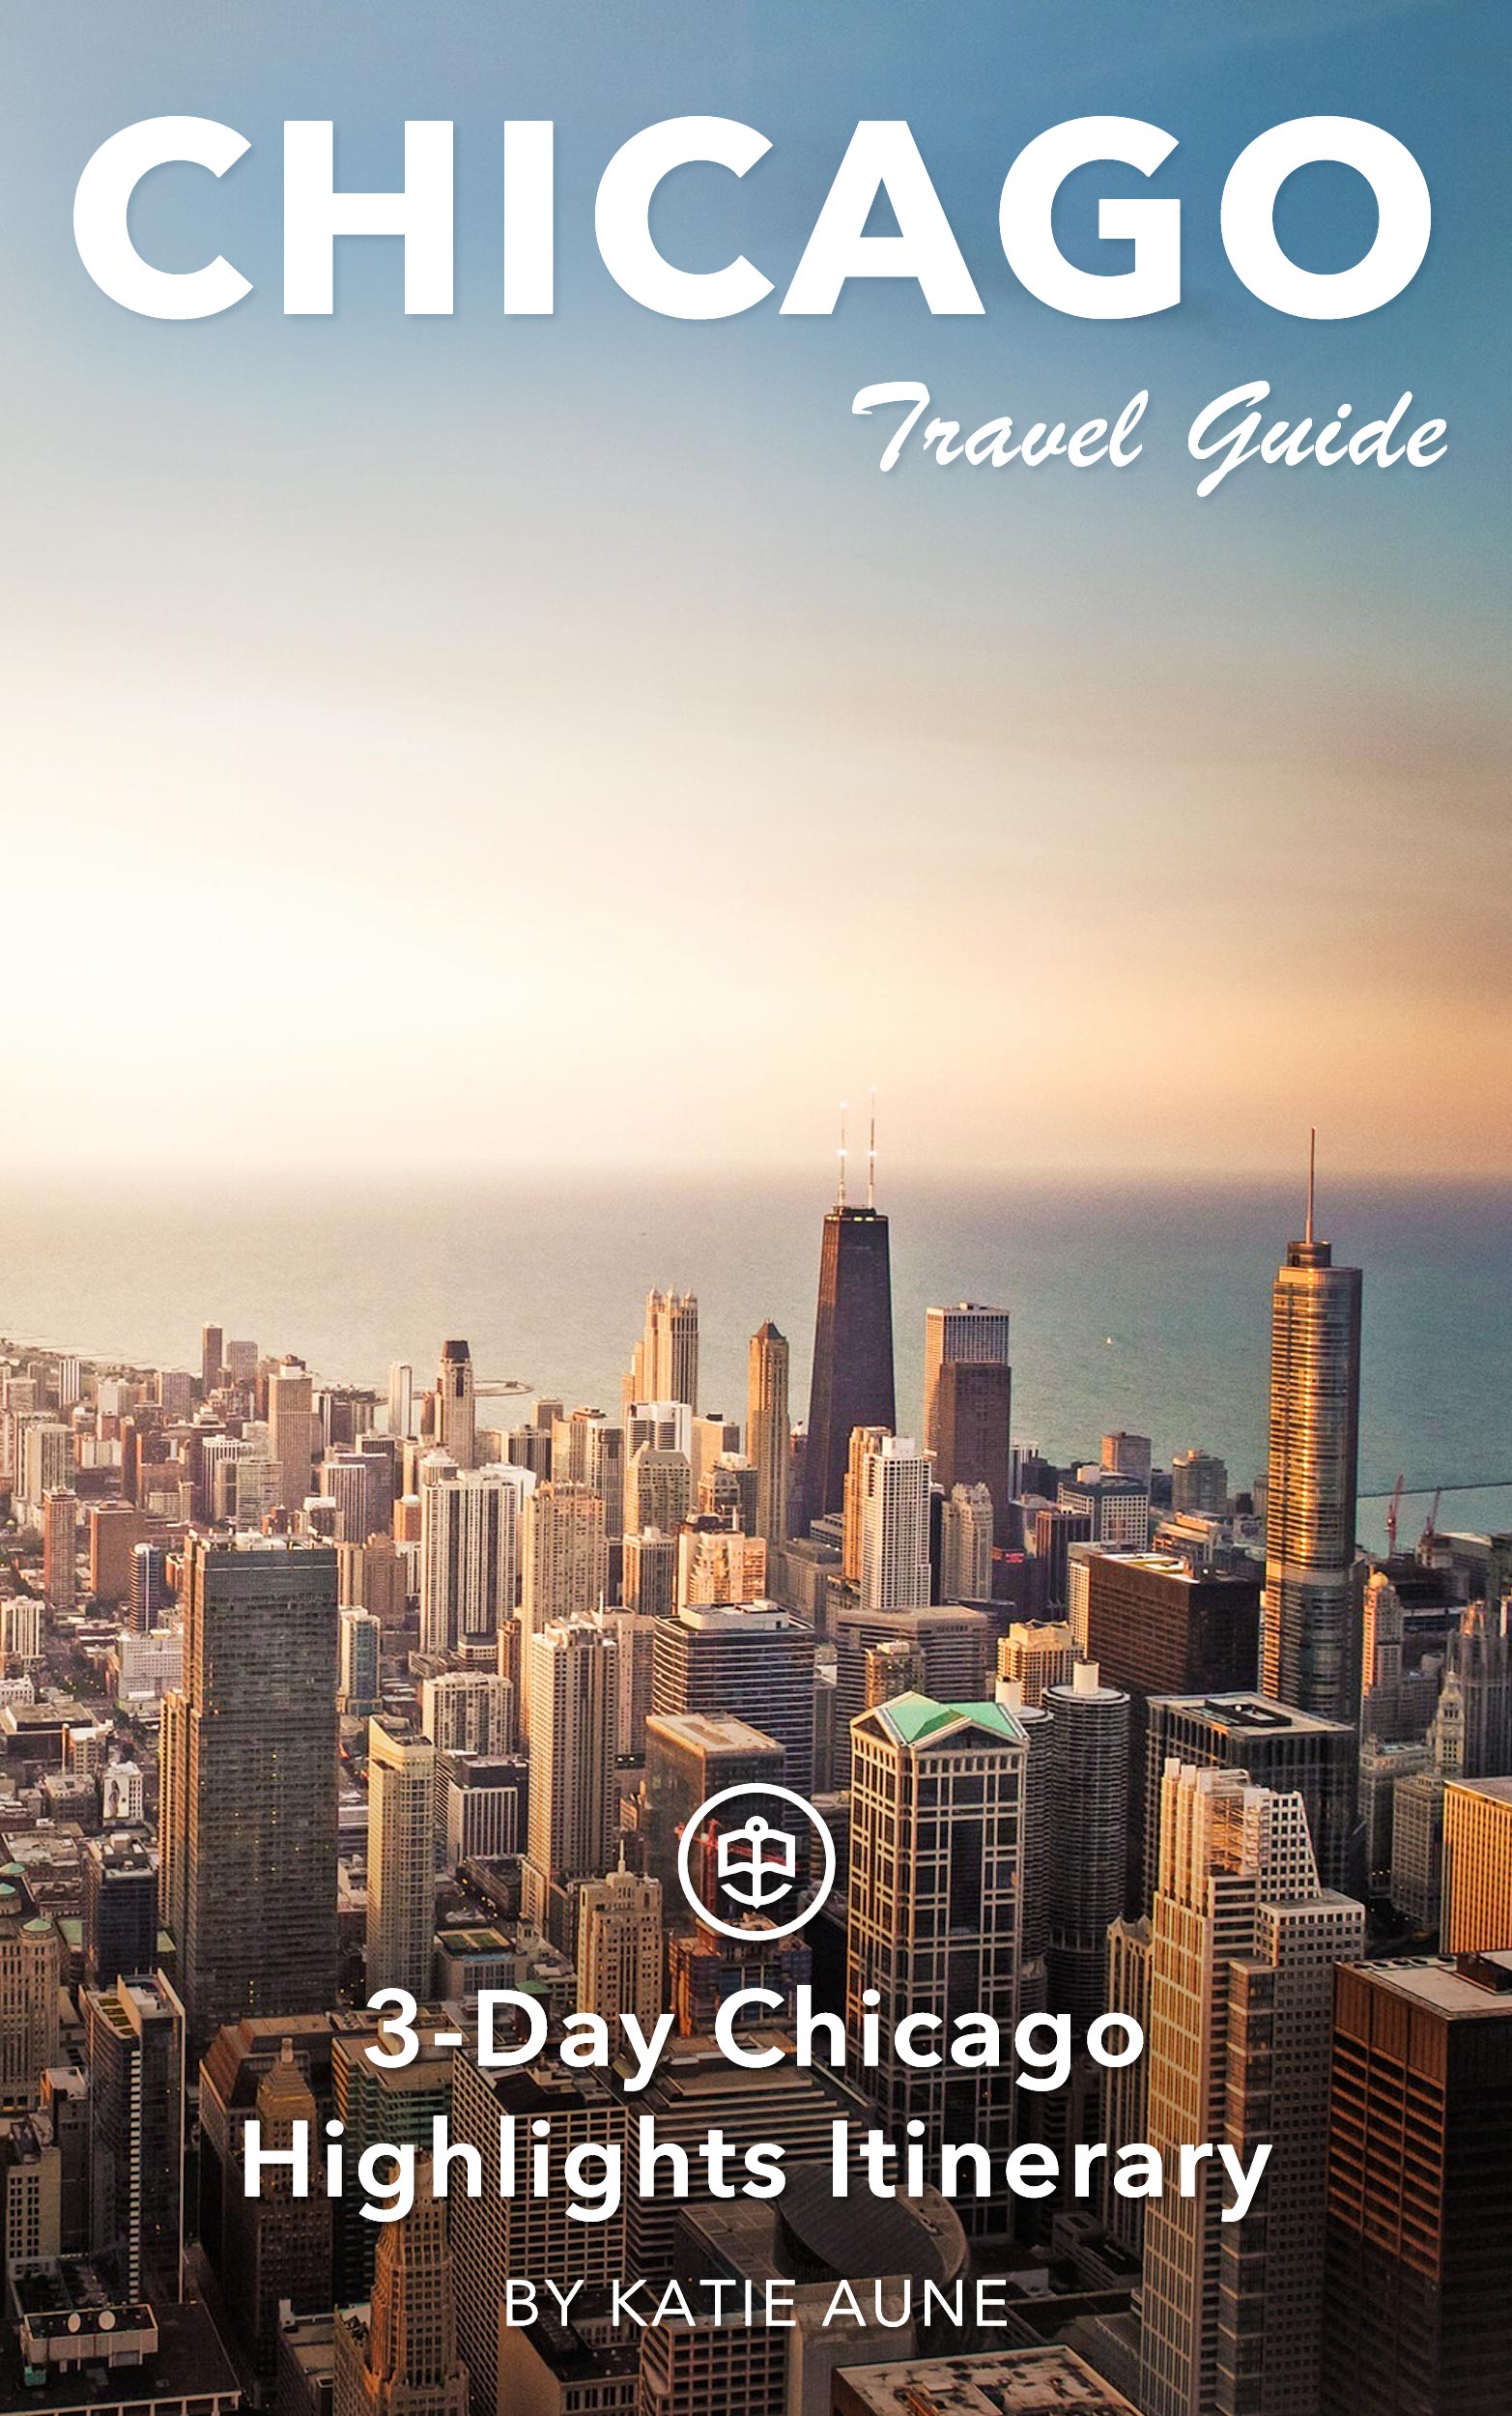 Chicago Travel Ideas for First-Time Visitors